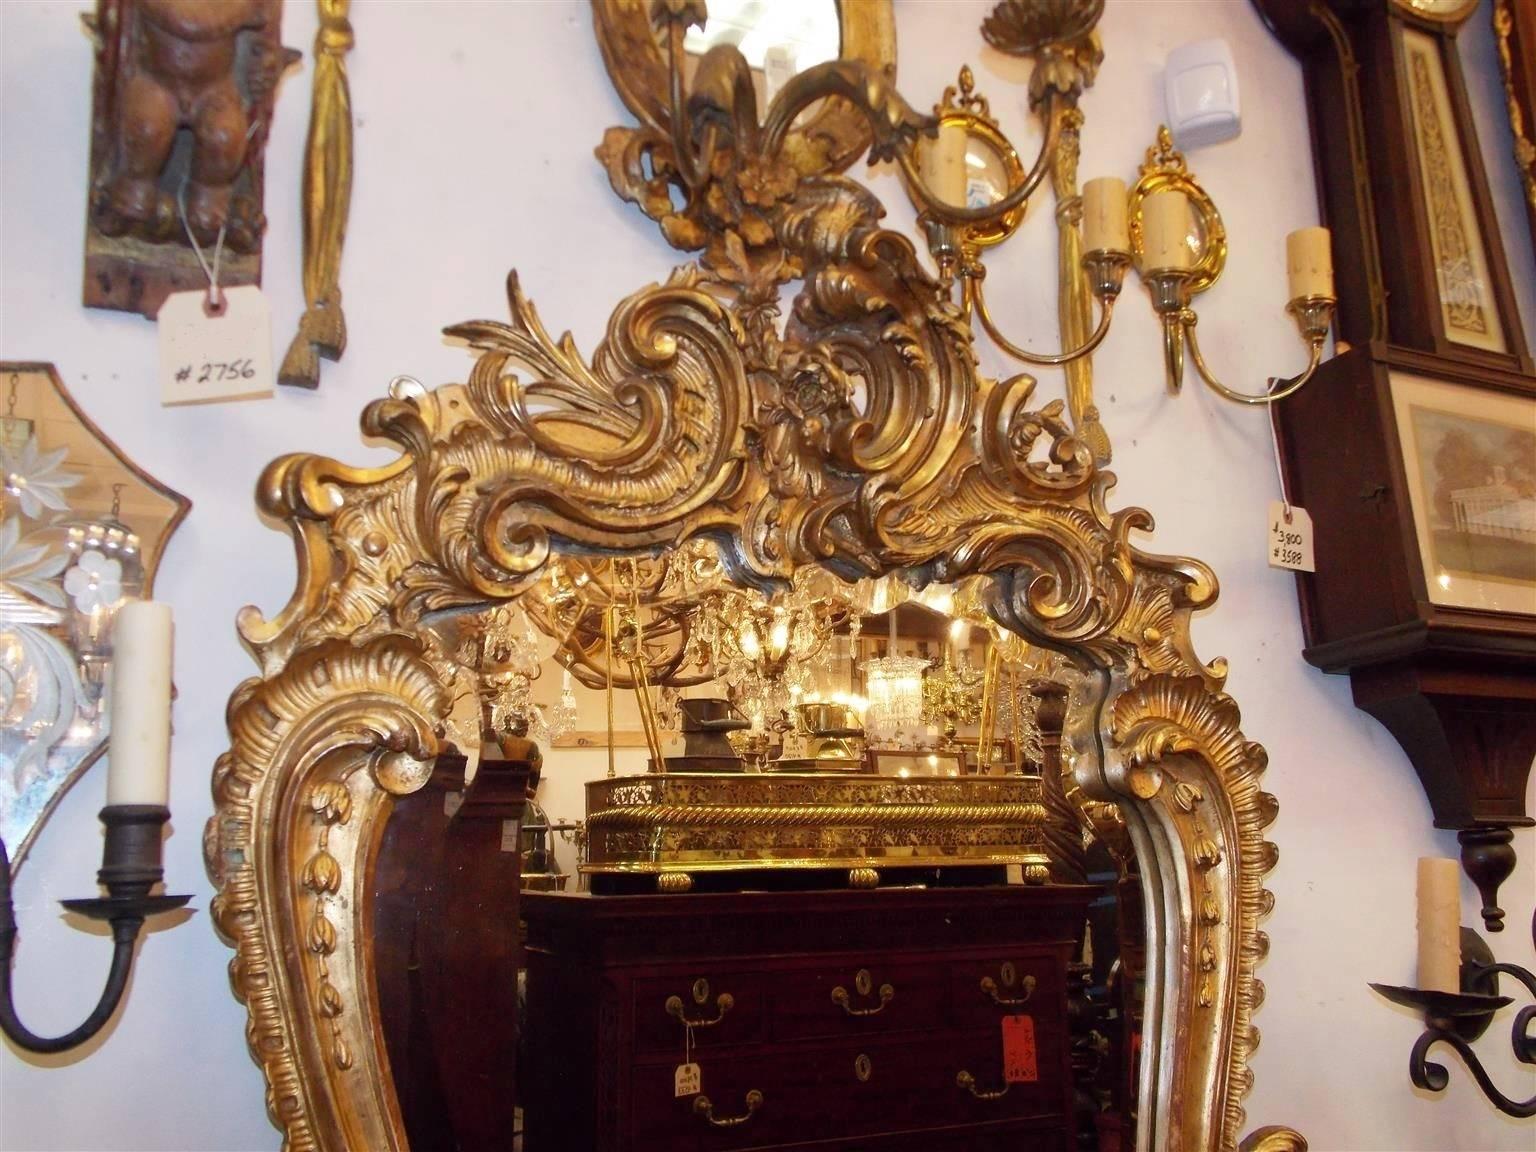 French gilt carved wood foliage wall mirror with a centered cartouche, sweeping scrolled sides with graduated bell flowers, flanking flower baskets, and terminating on a decorative floral border. Mirror retains the original beveled glass and wood